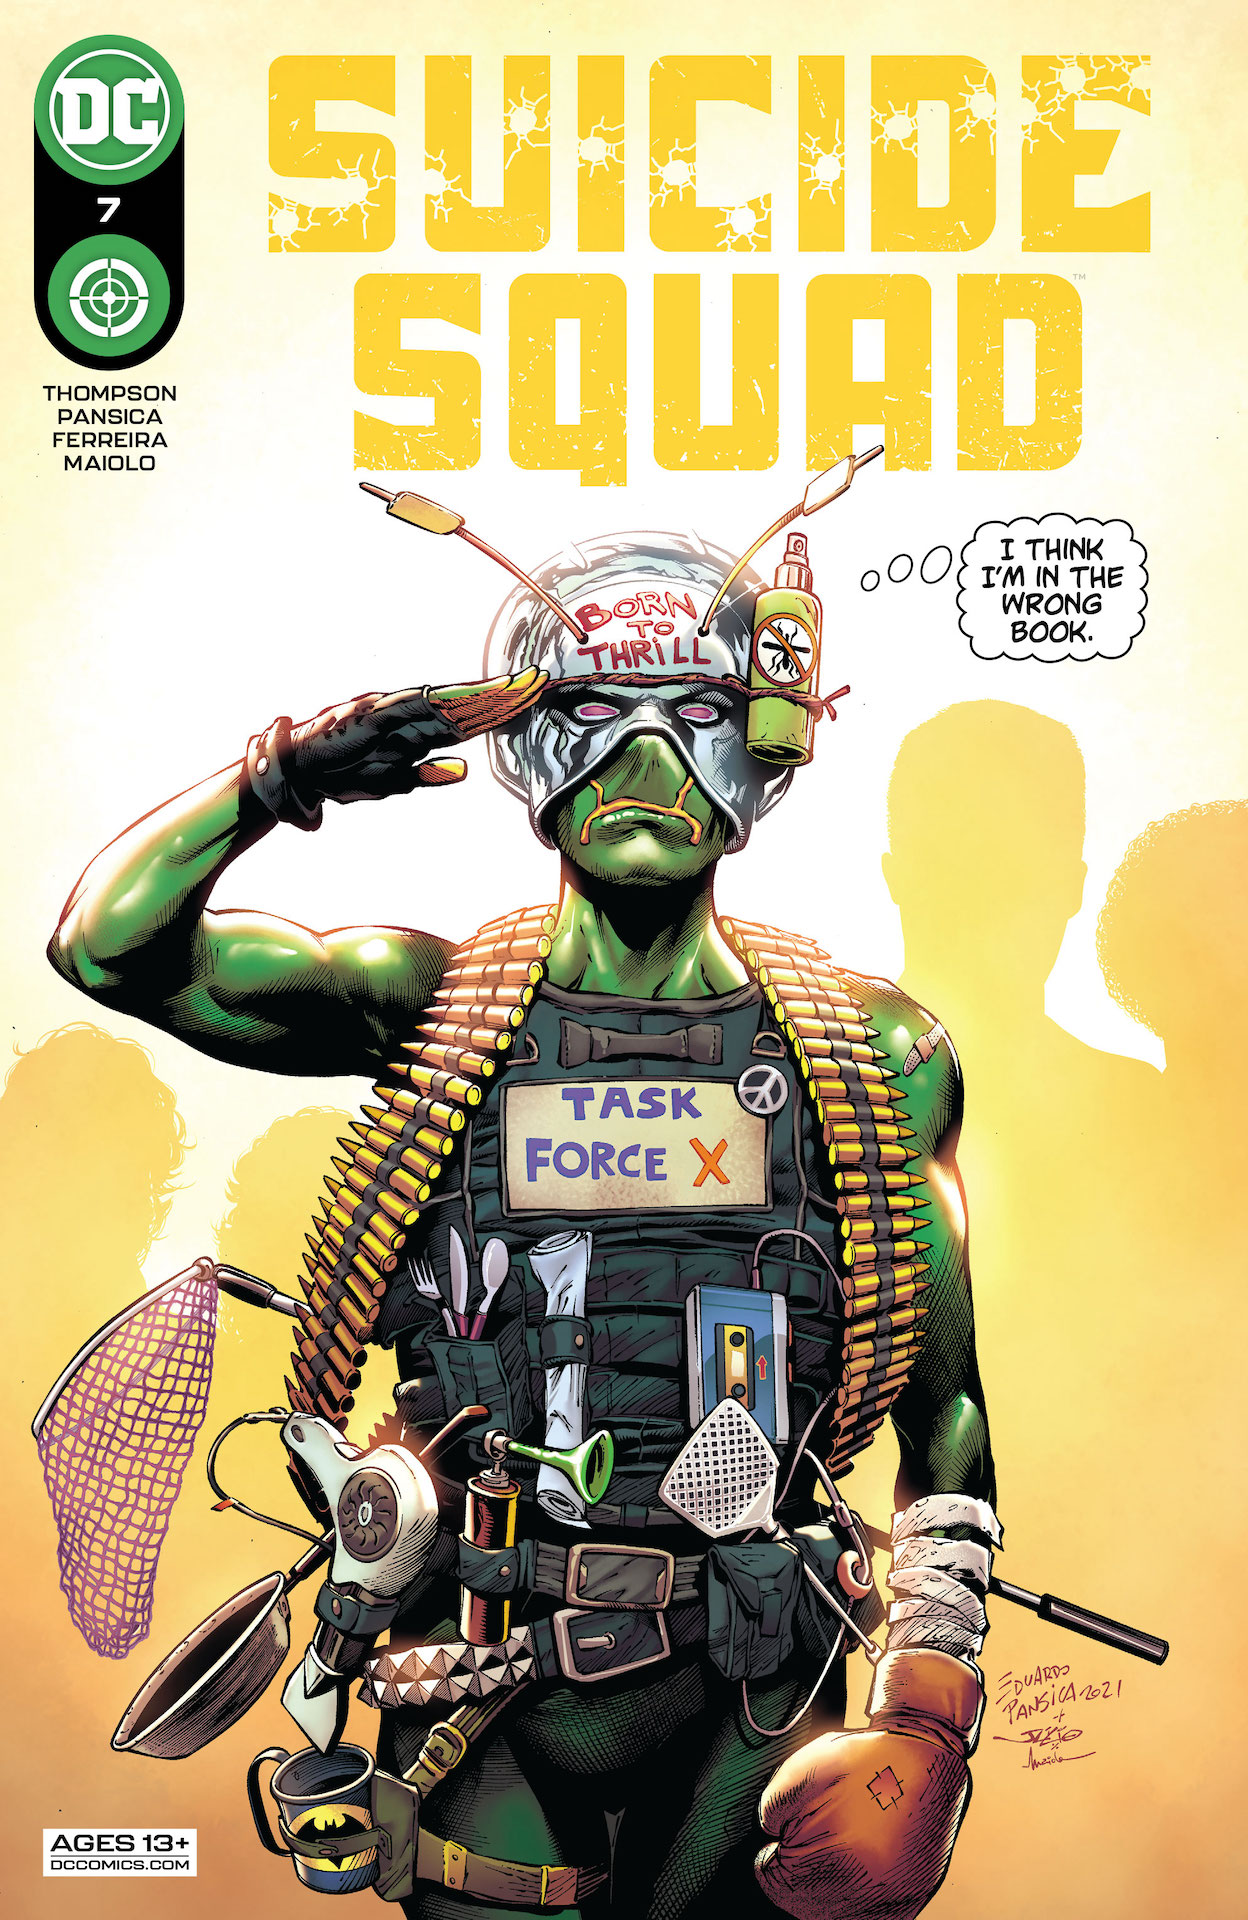 'Suicide Squad' #7 shows a mastery of team dynamics